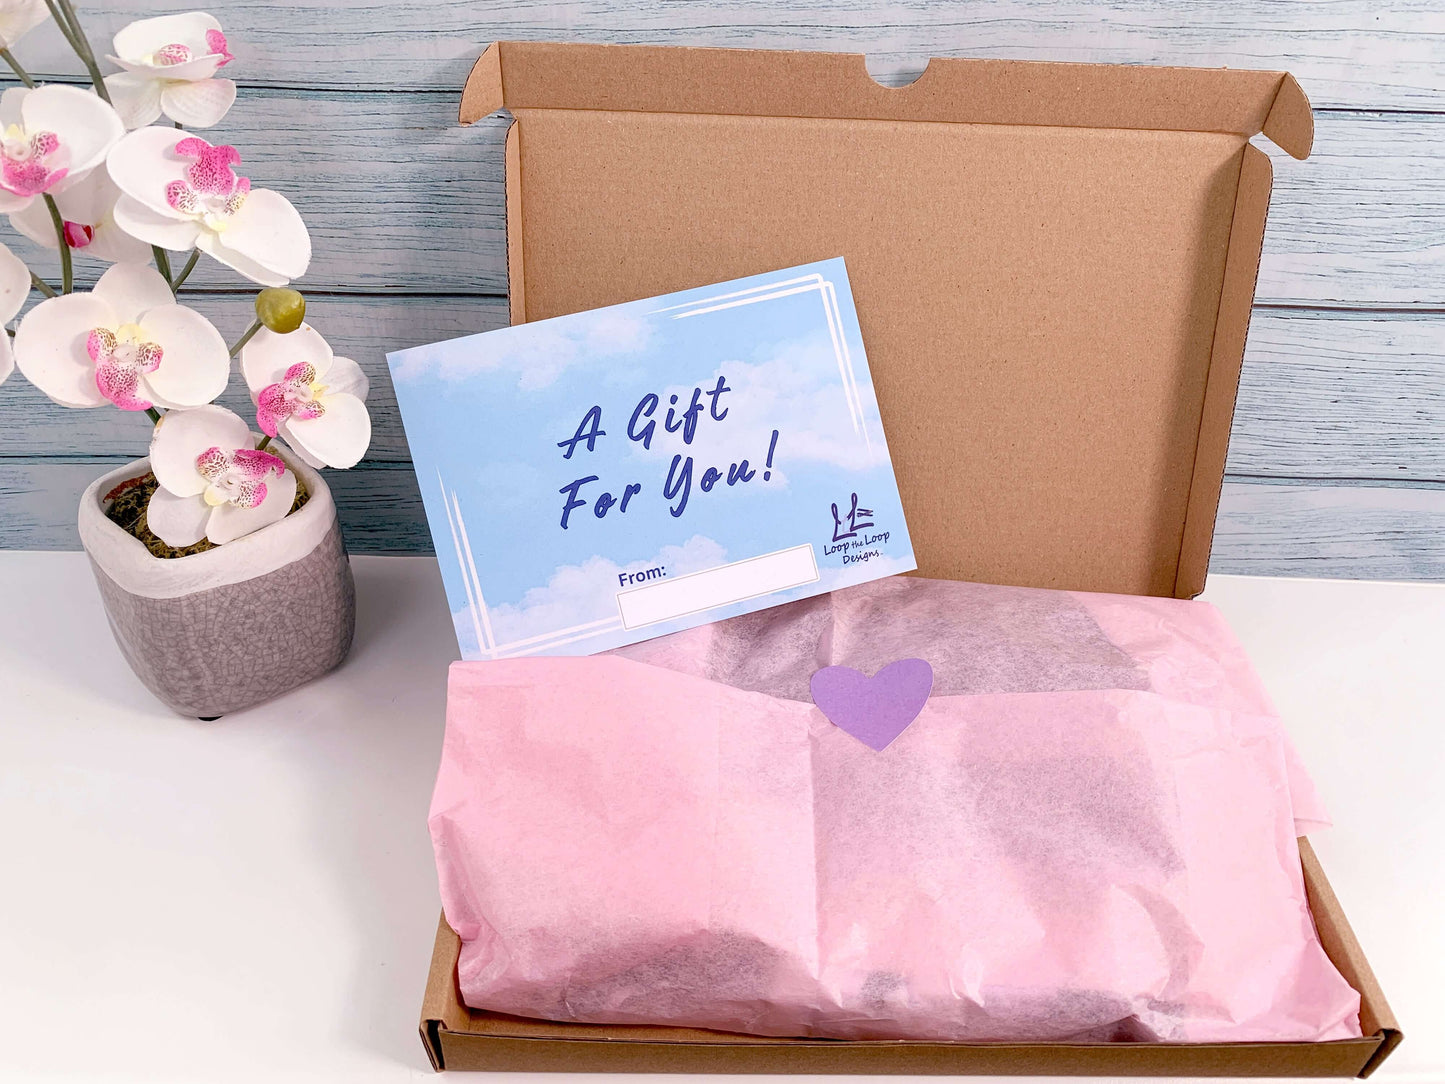 Gift wrapped with pink tissue paper and purple heart sticker to Close. Gift slip sky and cloud background design with wording A Gift for You and blank white box to add from: ....... Loop the Loop Designs logo bottom right. Pink orchid faux plant to right of giftset box